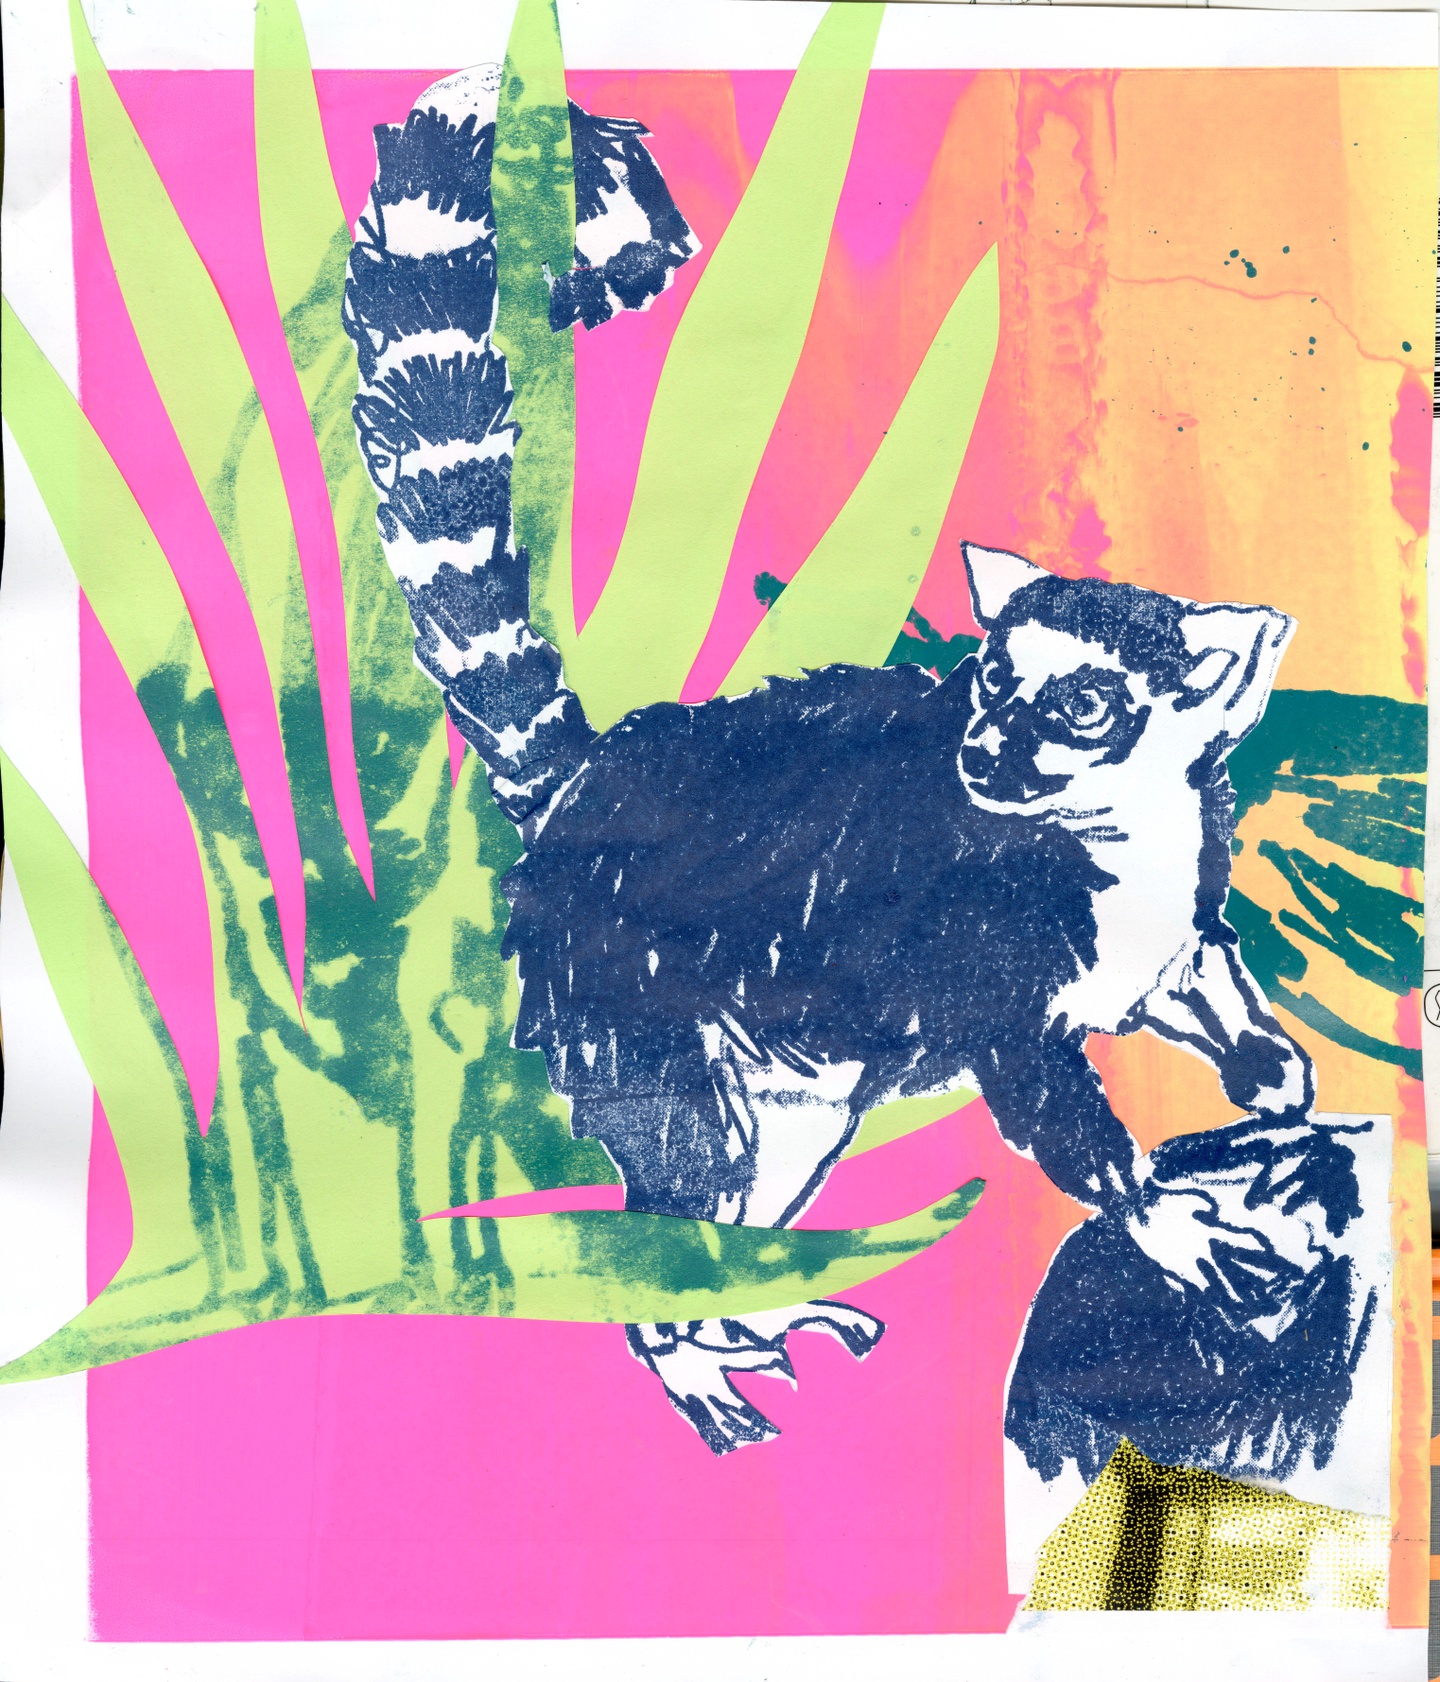 A collage of a lemur with a leafy green plant on a pink and orange printed background